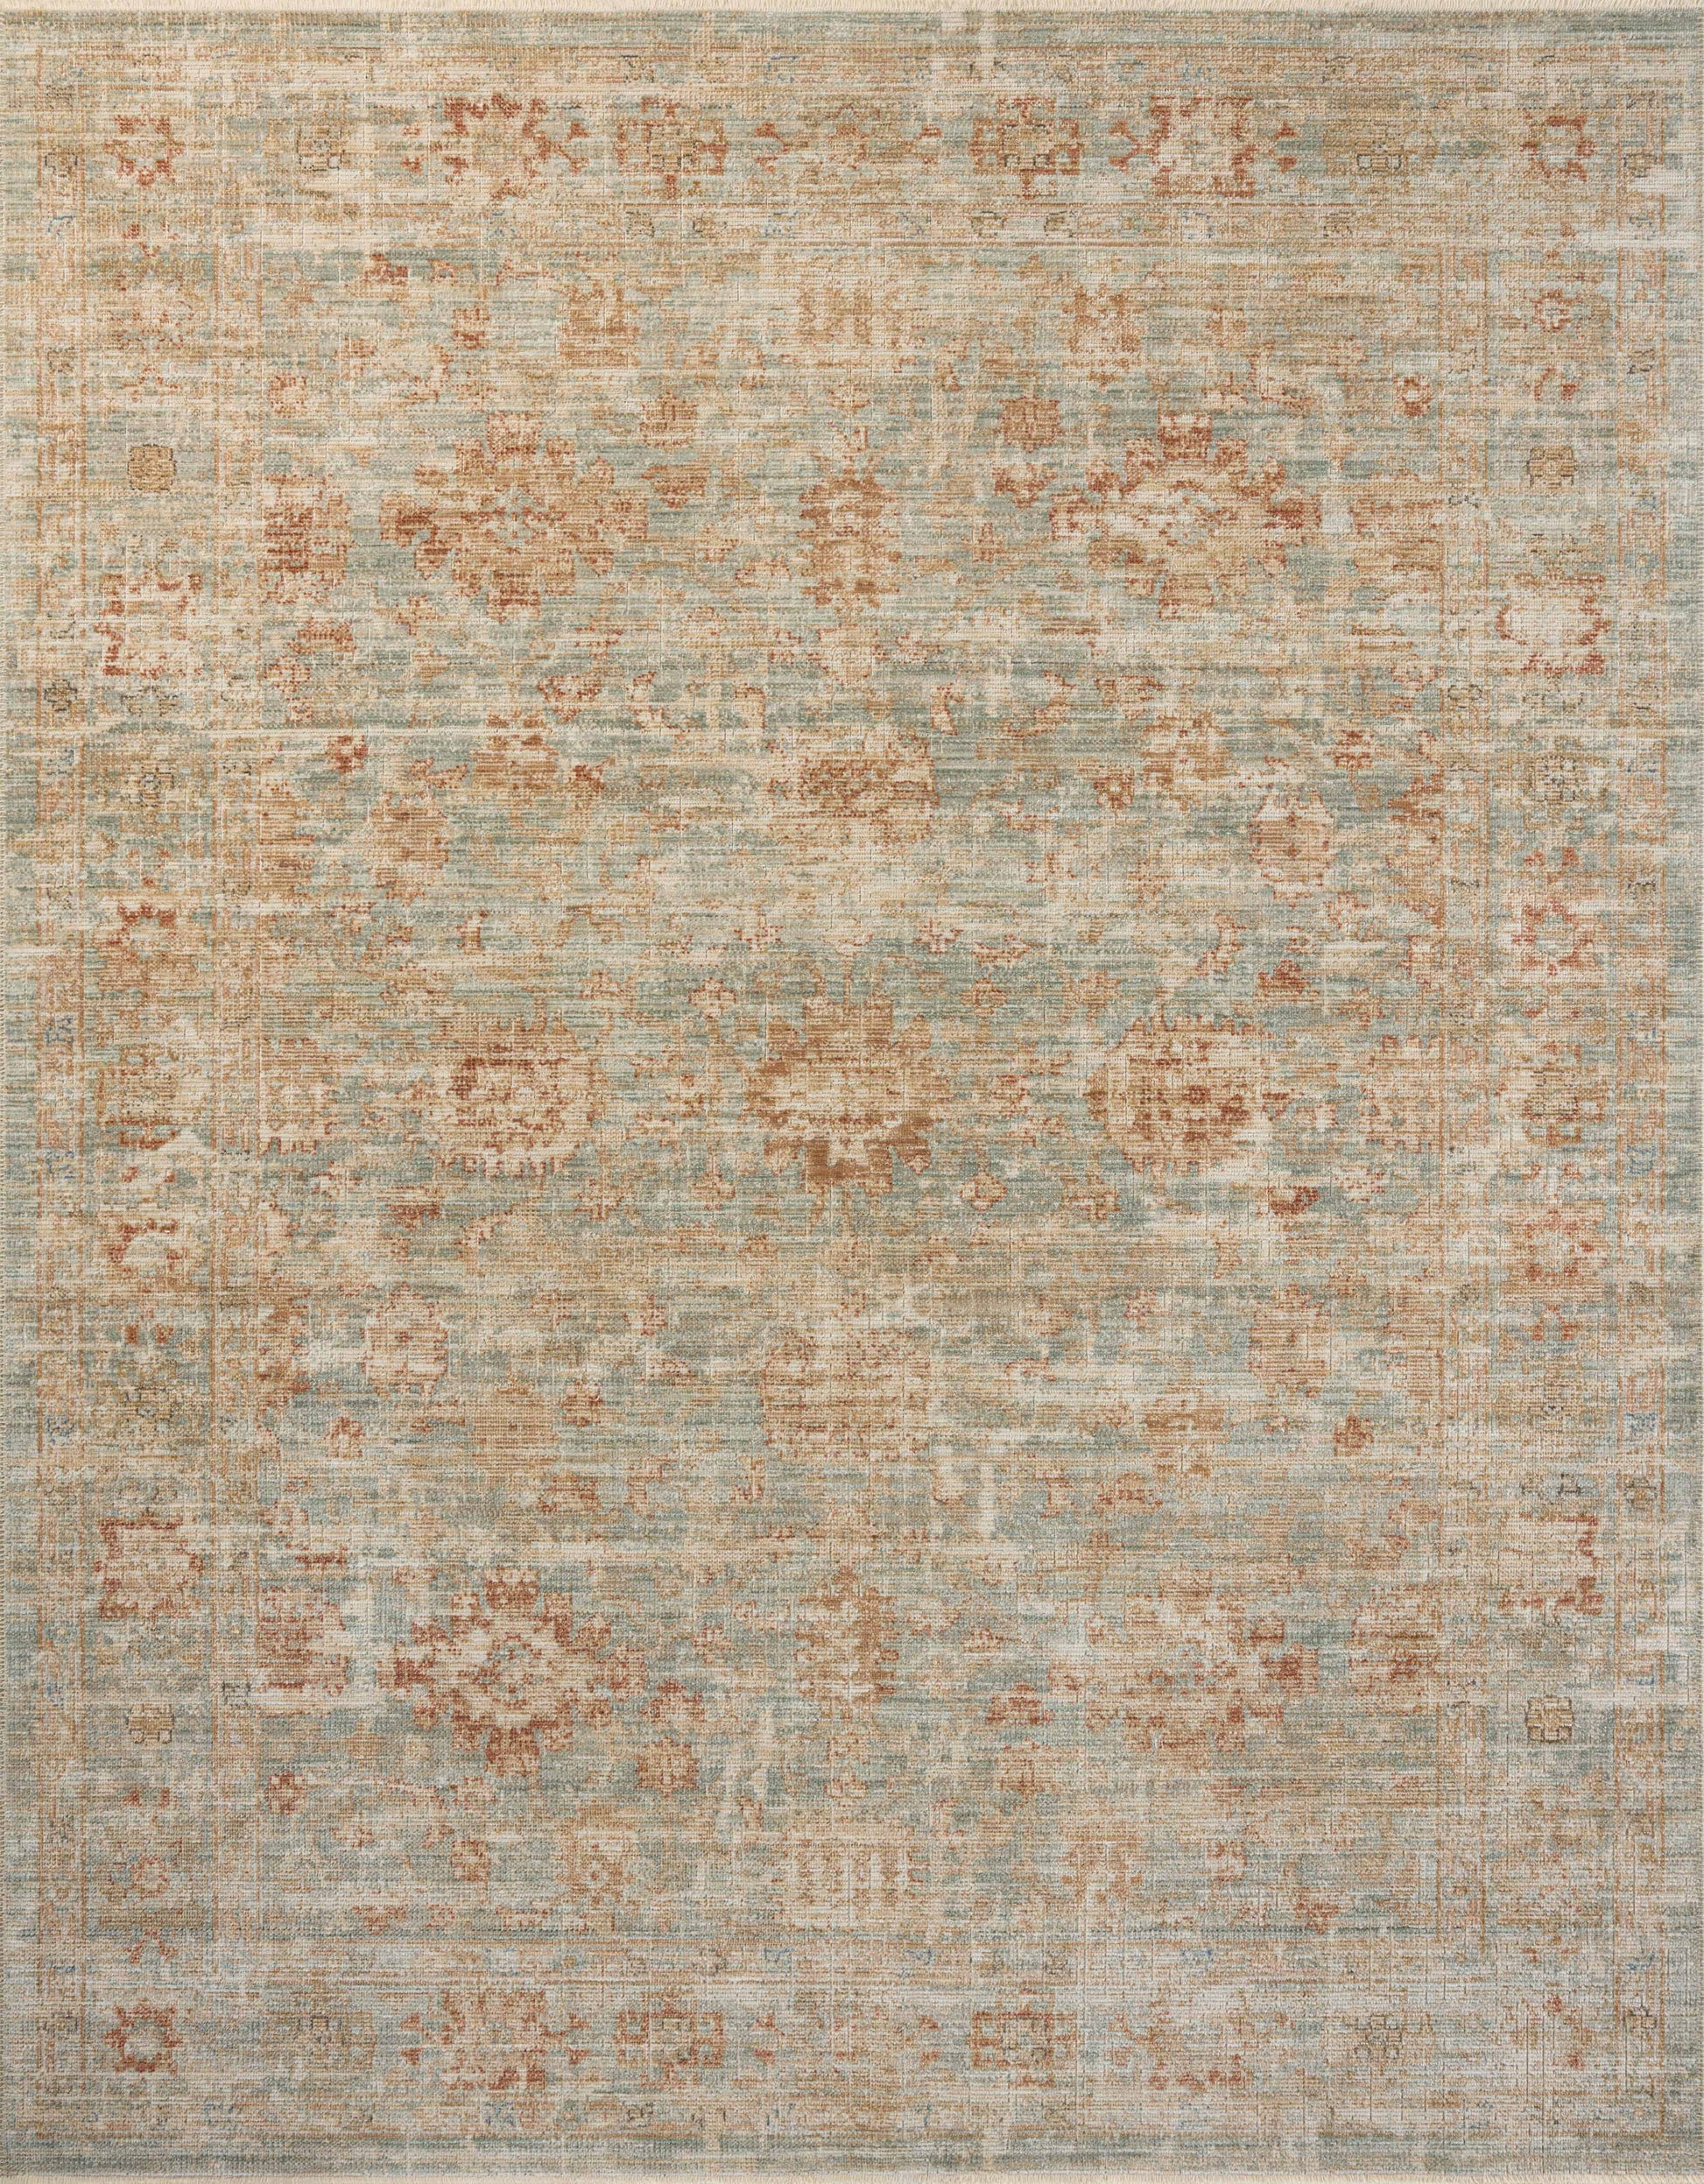 A picture of Loloi's Heritage rug, in style HER-06, color Aqua / Terracotta